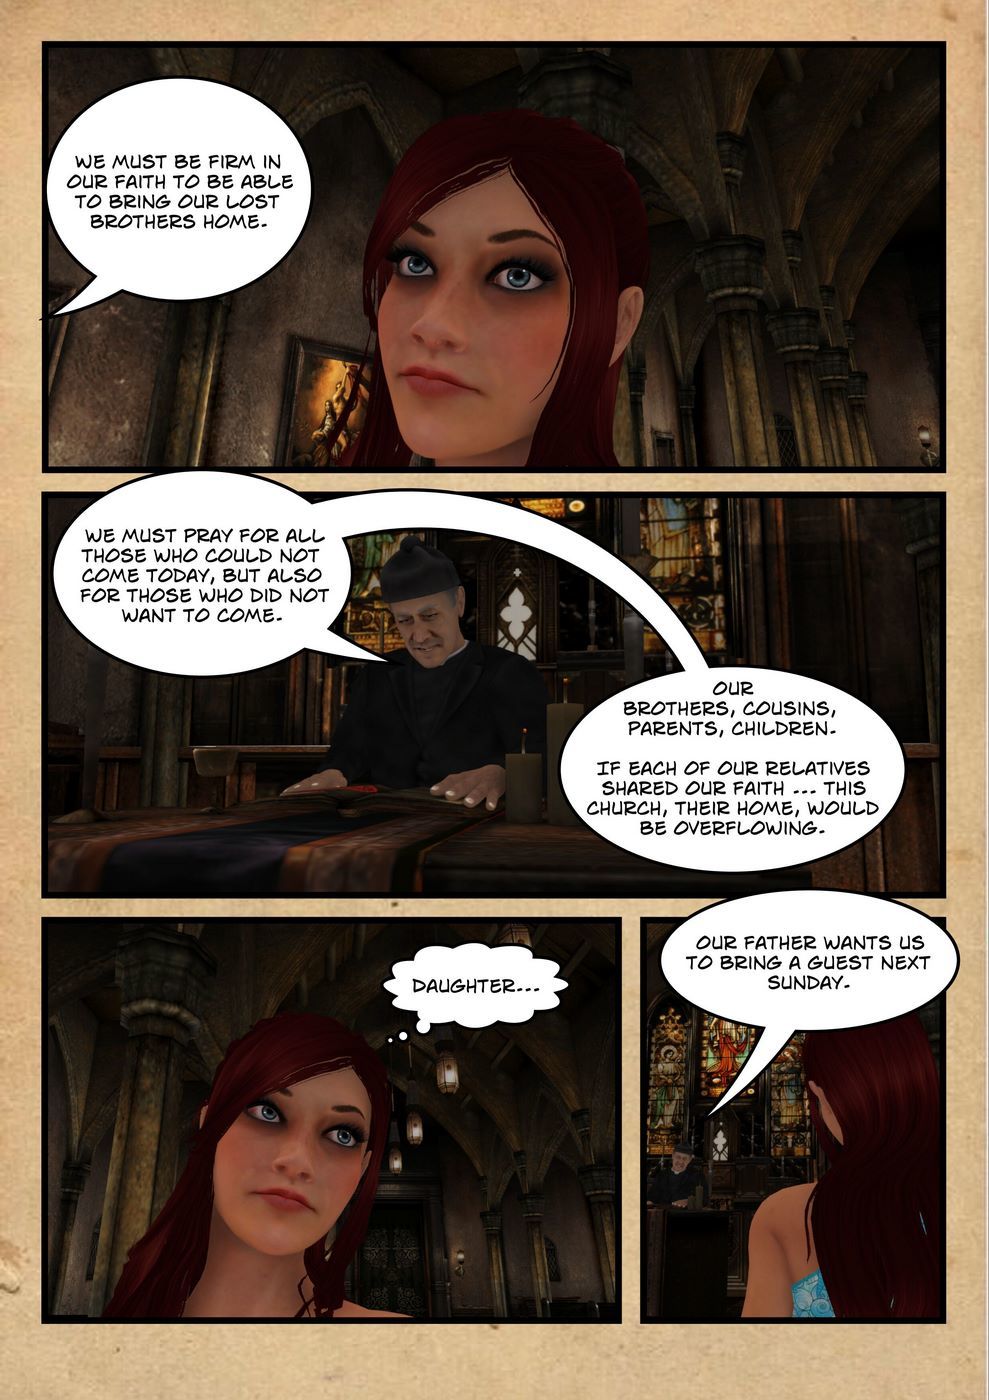 Testing The Faith - Supersoft2 page 2